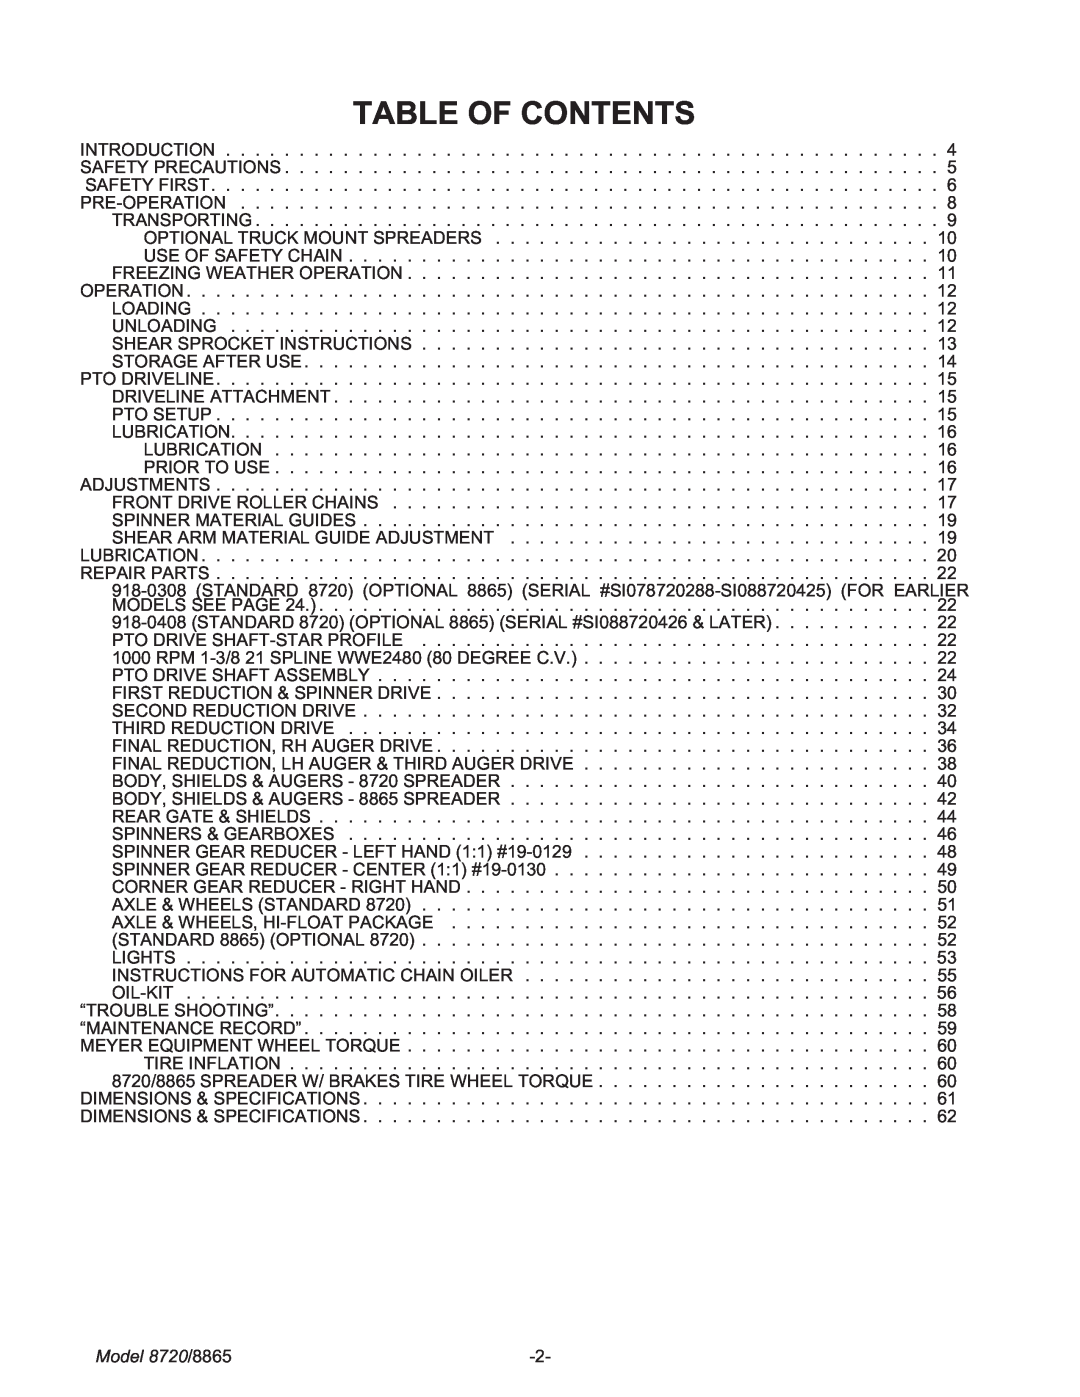 Meyer manual Table Of Contents, Model 8720/8865 